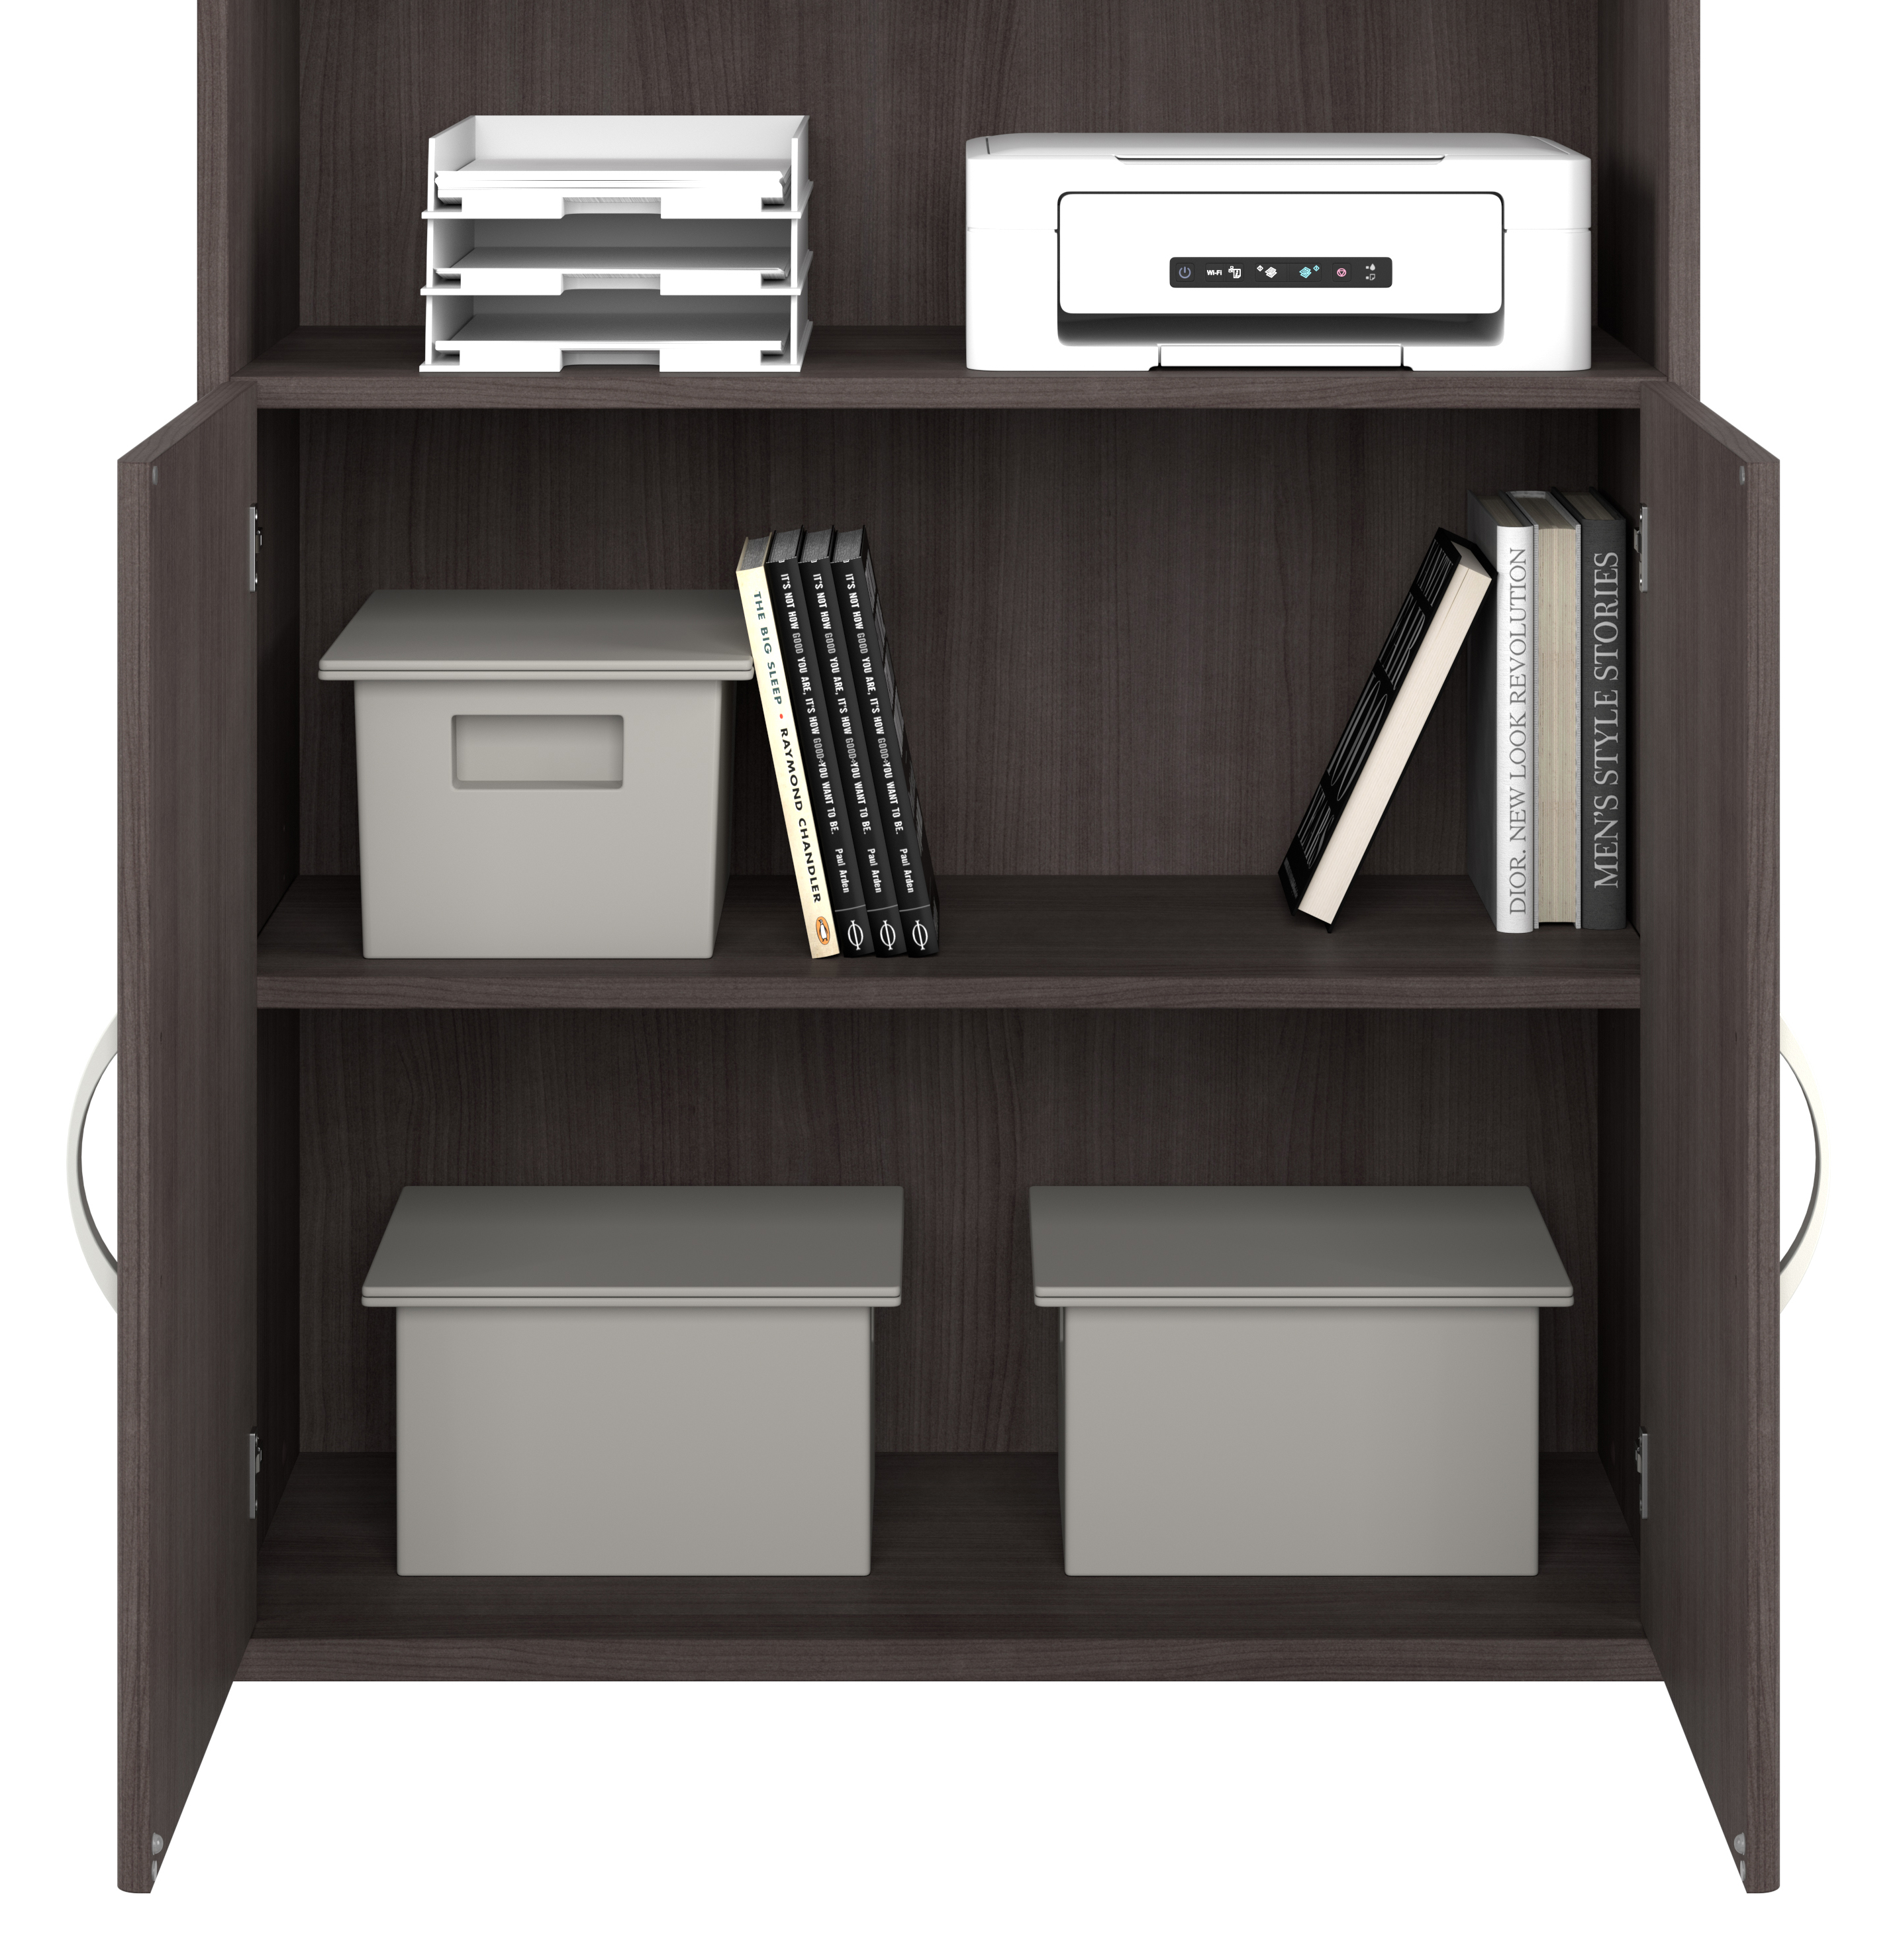 Shop Bush Business Furniture Studio A Tall 5 Shelf Bookcase with Doors 03 STA010SG #color_storm gray